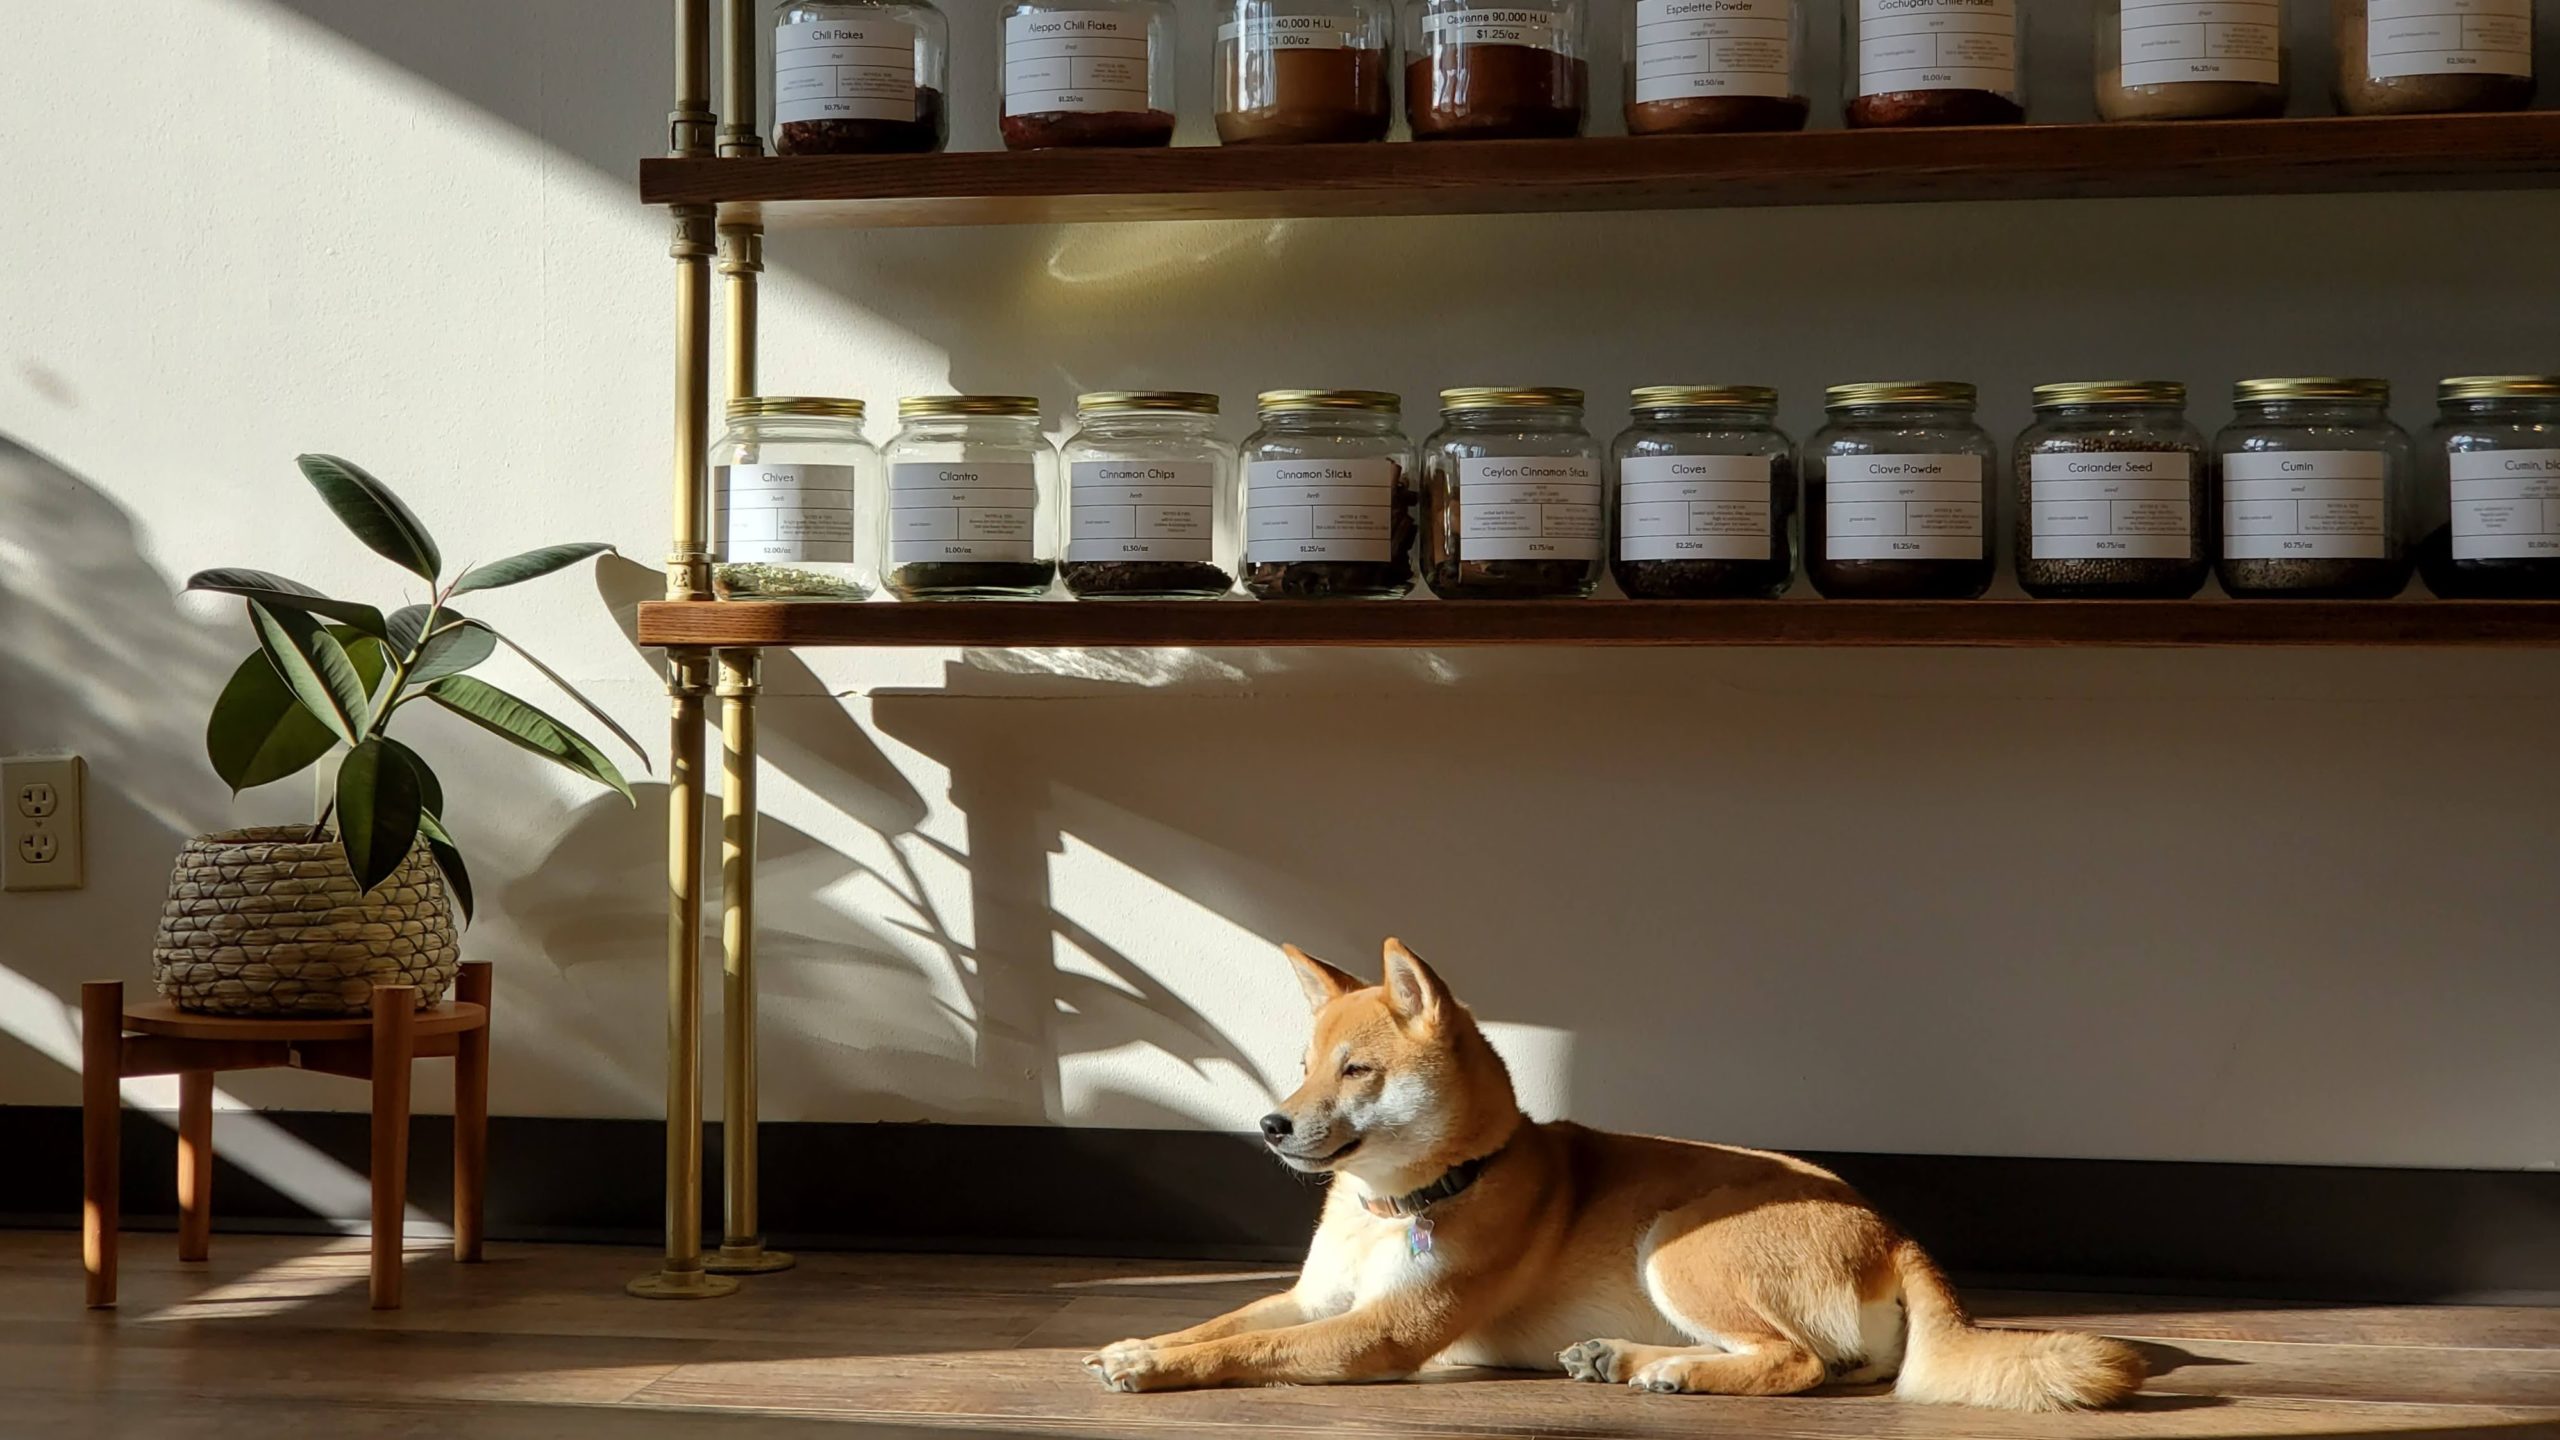 a Shiba Inu named Maya lays contentedly in a ray of sunlight in front of a shelf full of glass jars that contain tea